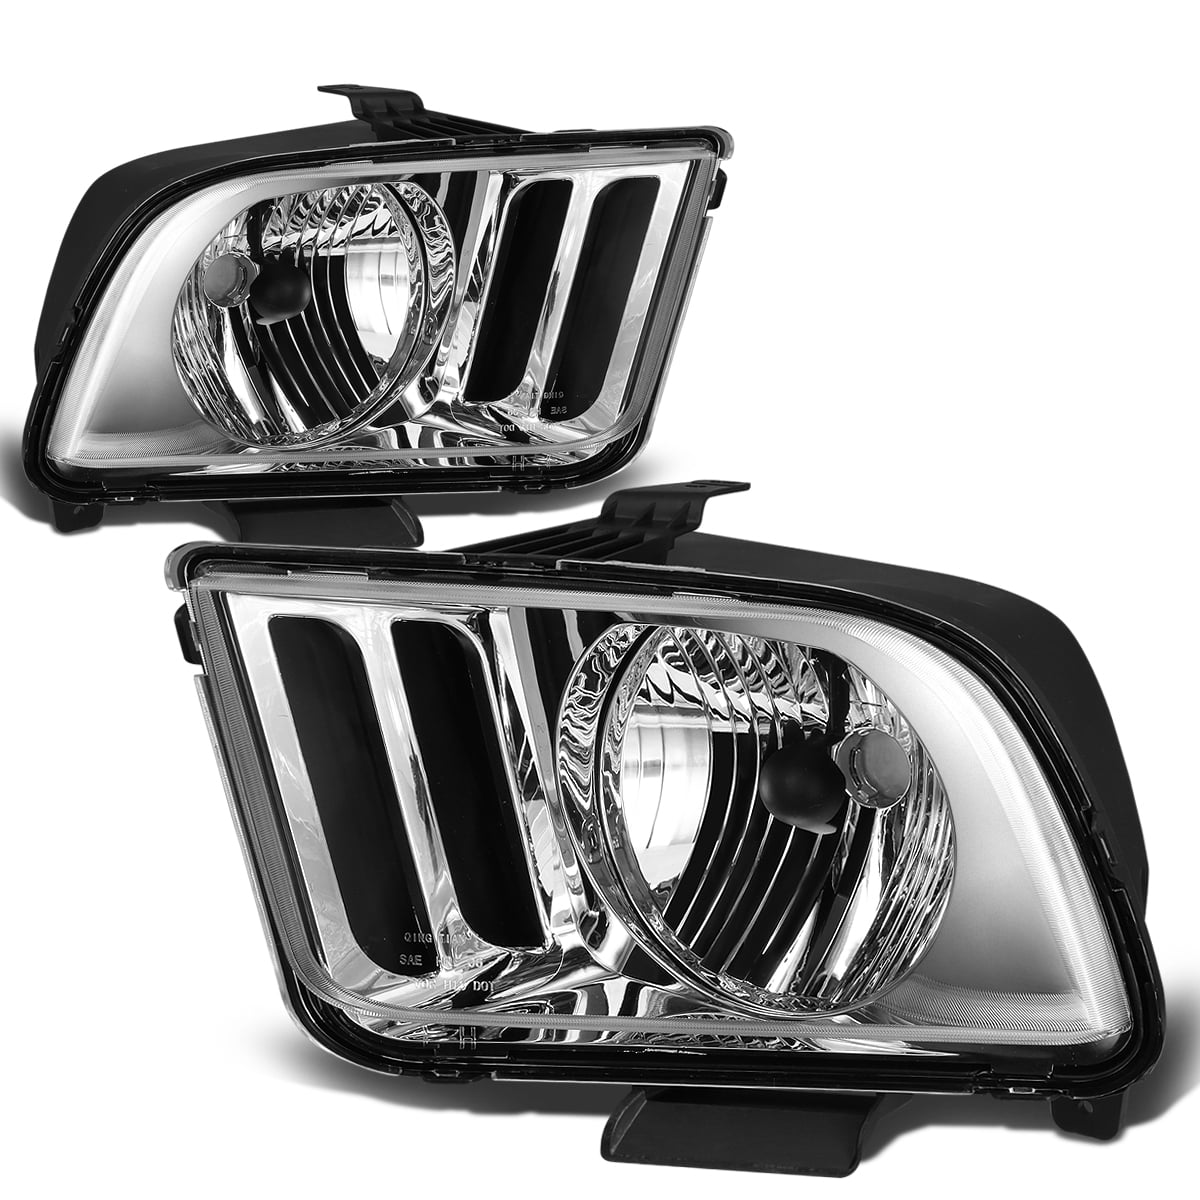 2005-2009 Ford Mustang Black LED Tube Projector Headlights Headlamps Left+Right